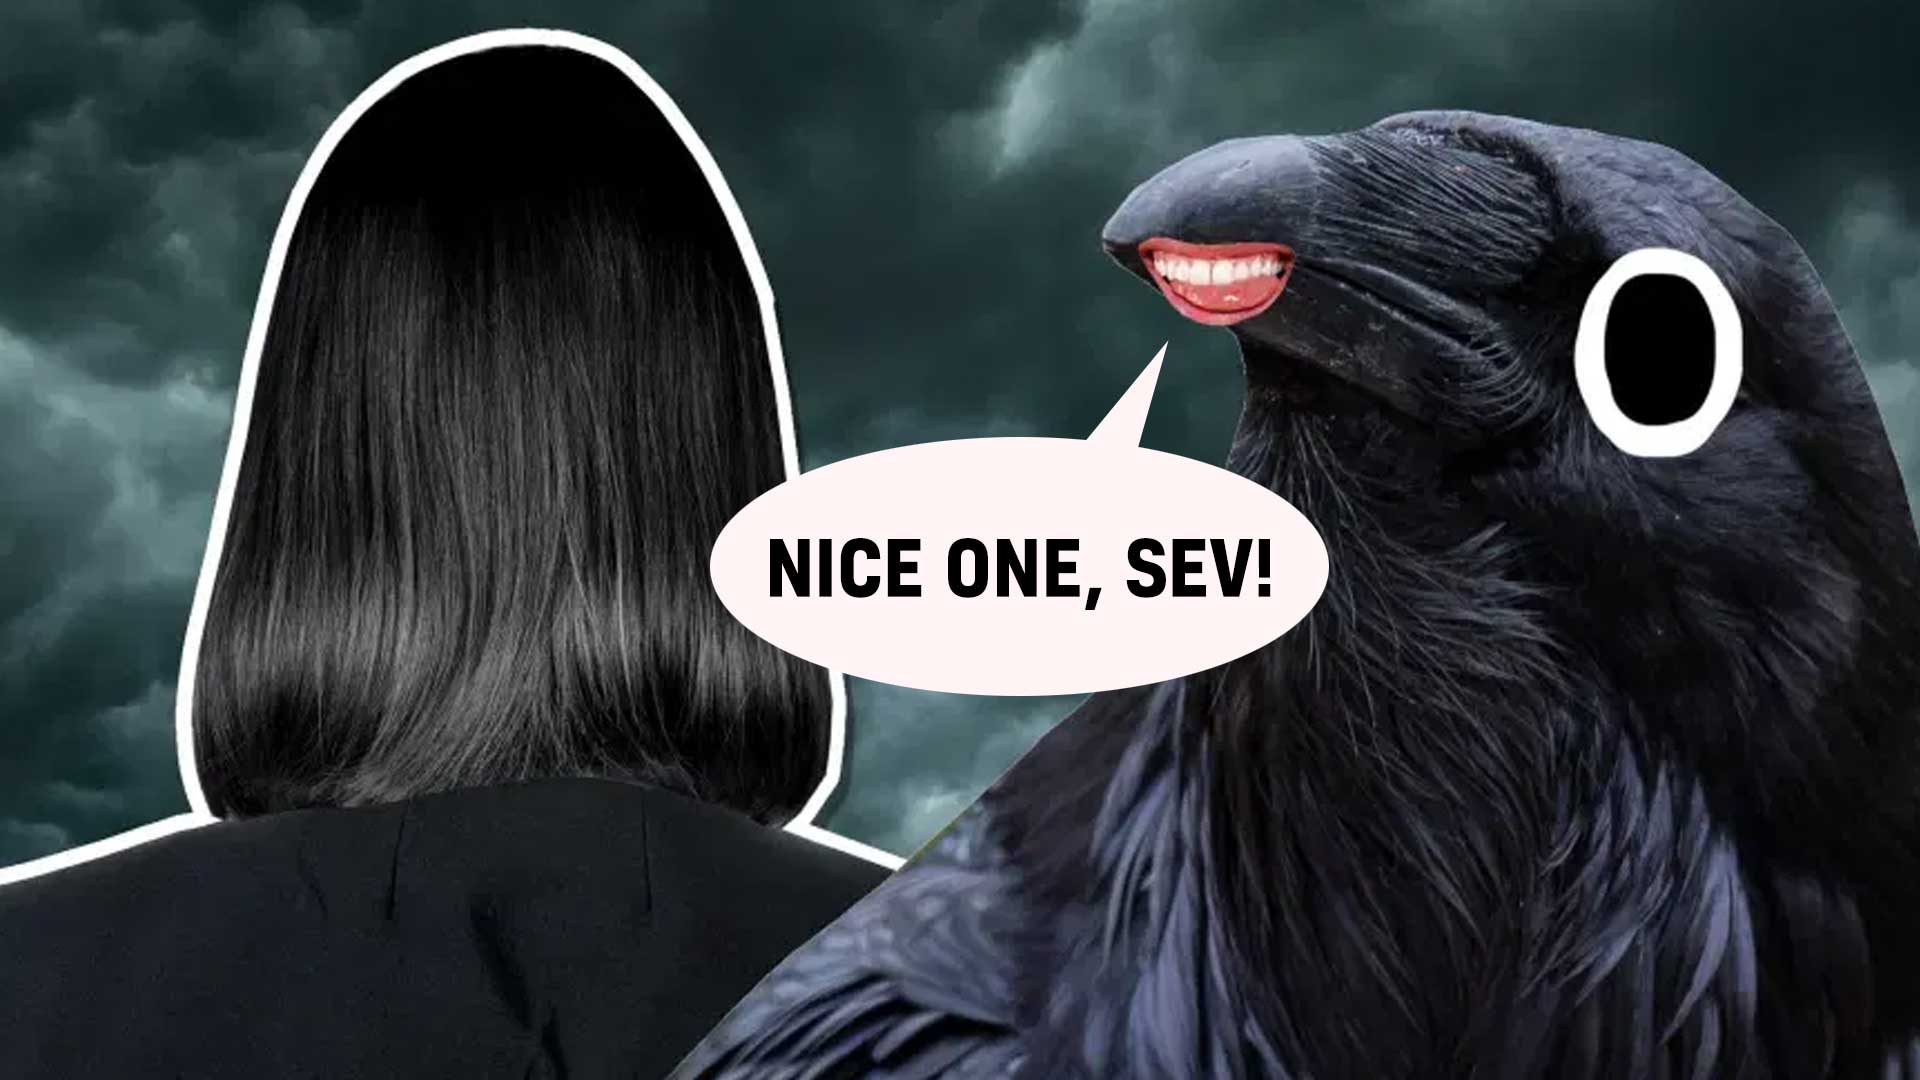 Snape and a crow play a prank